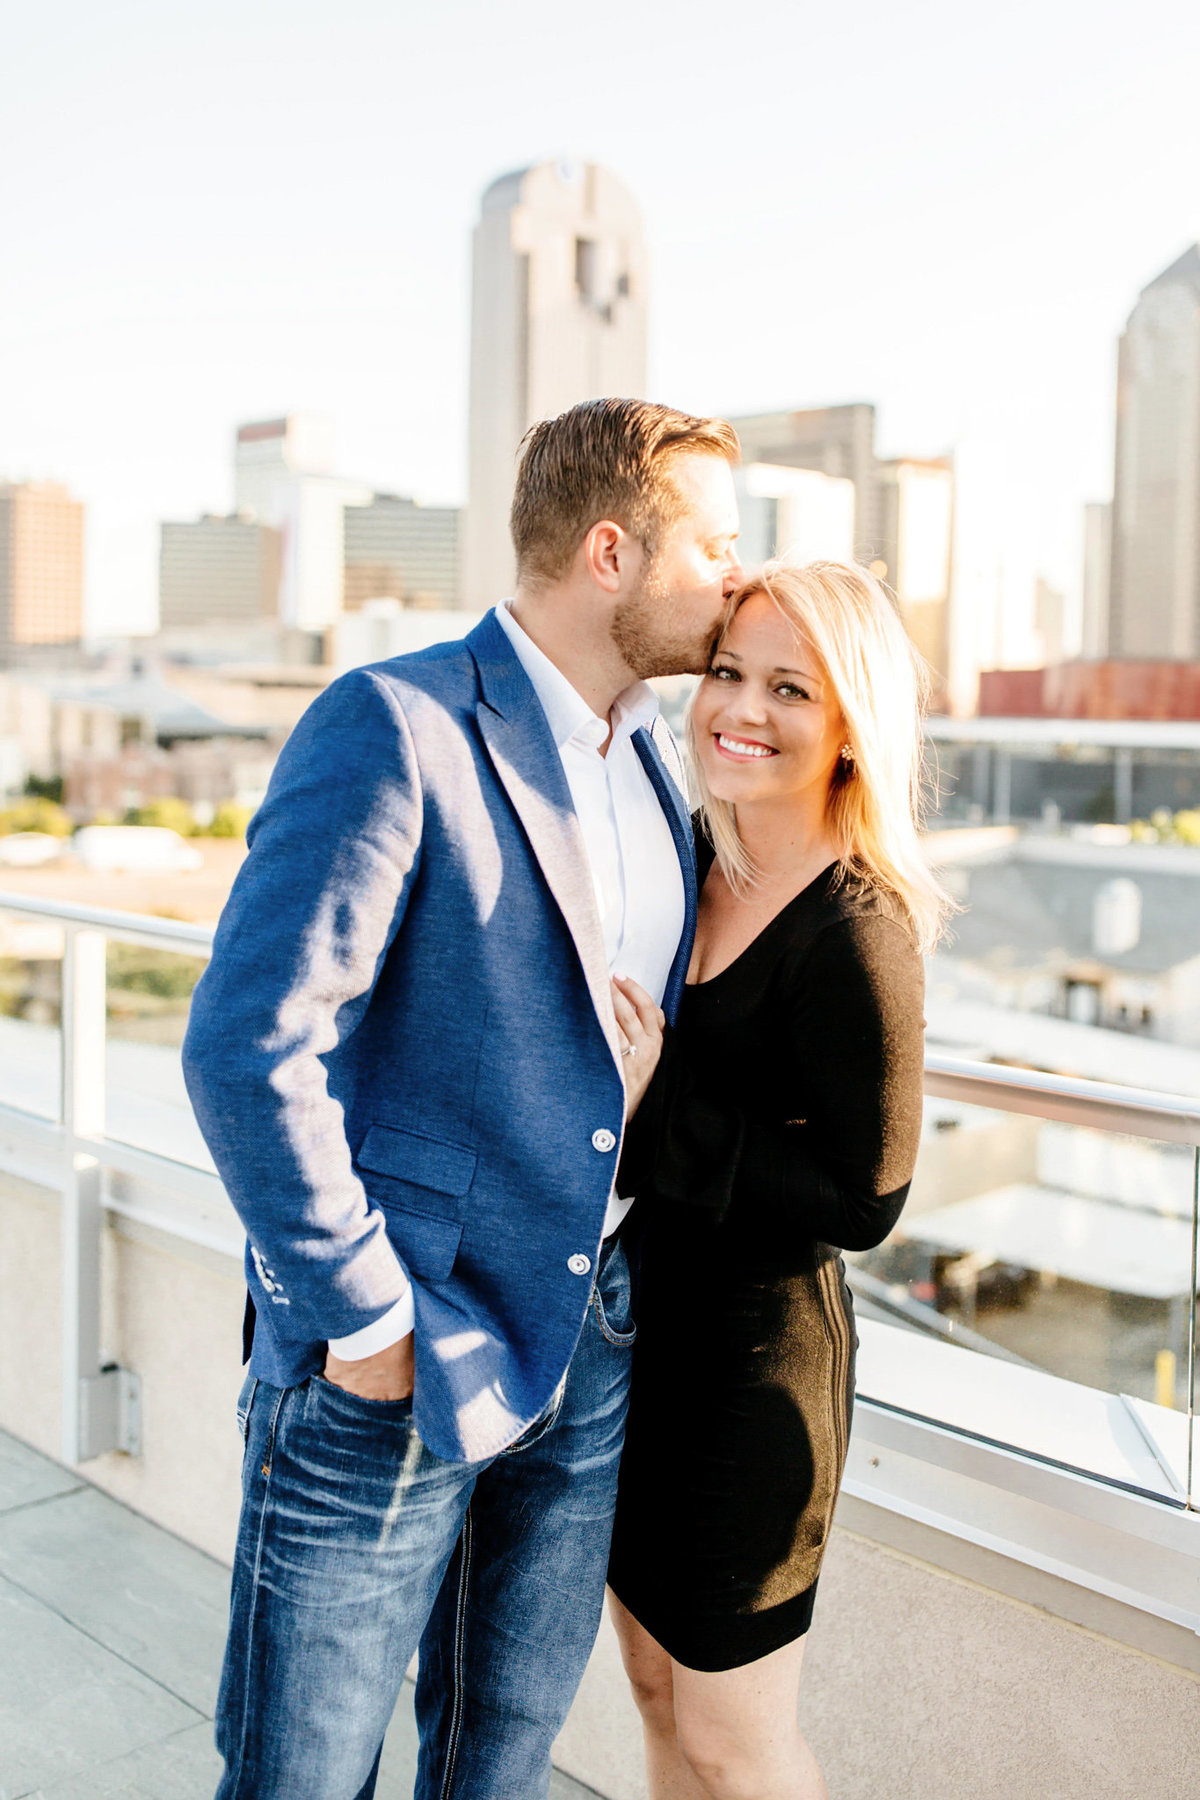 Eric & Megan - Downtown Dallas Rooftop Proposal & Engagement Session-66